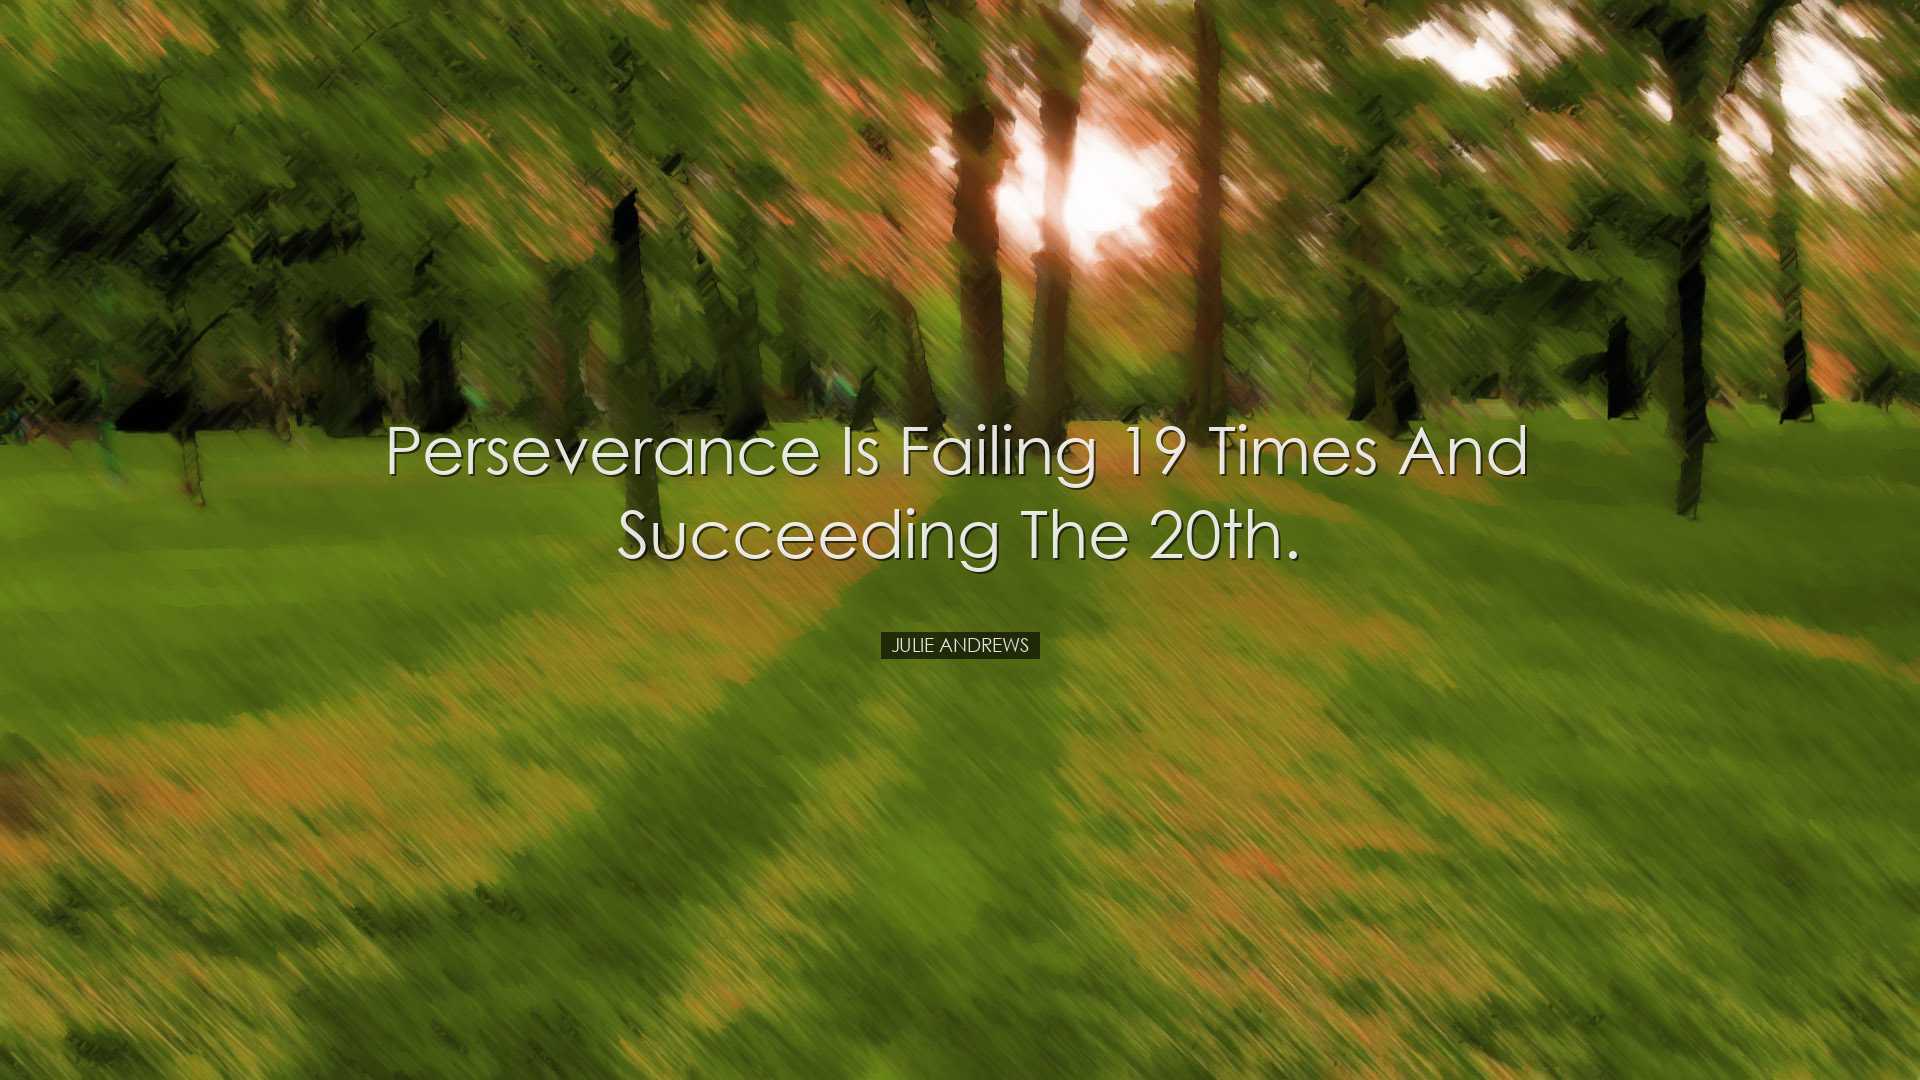 Perseverance is failing 19 times and succeeding the 20th. - Julie